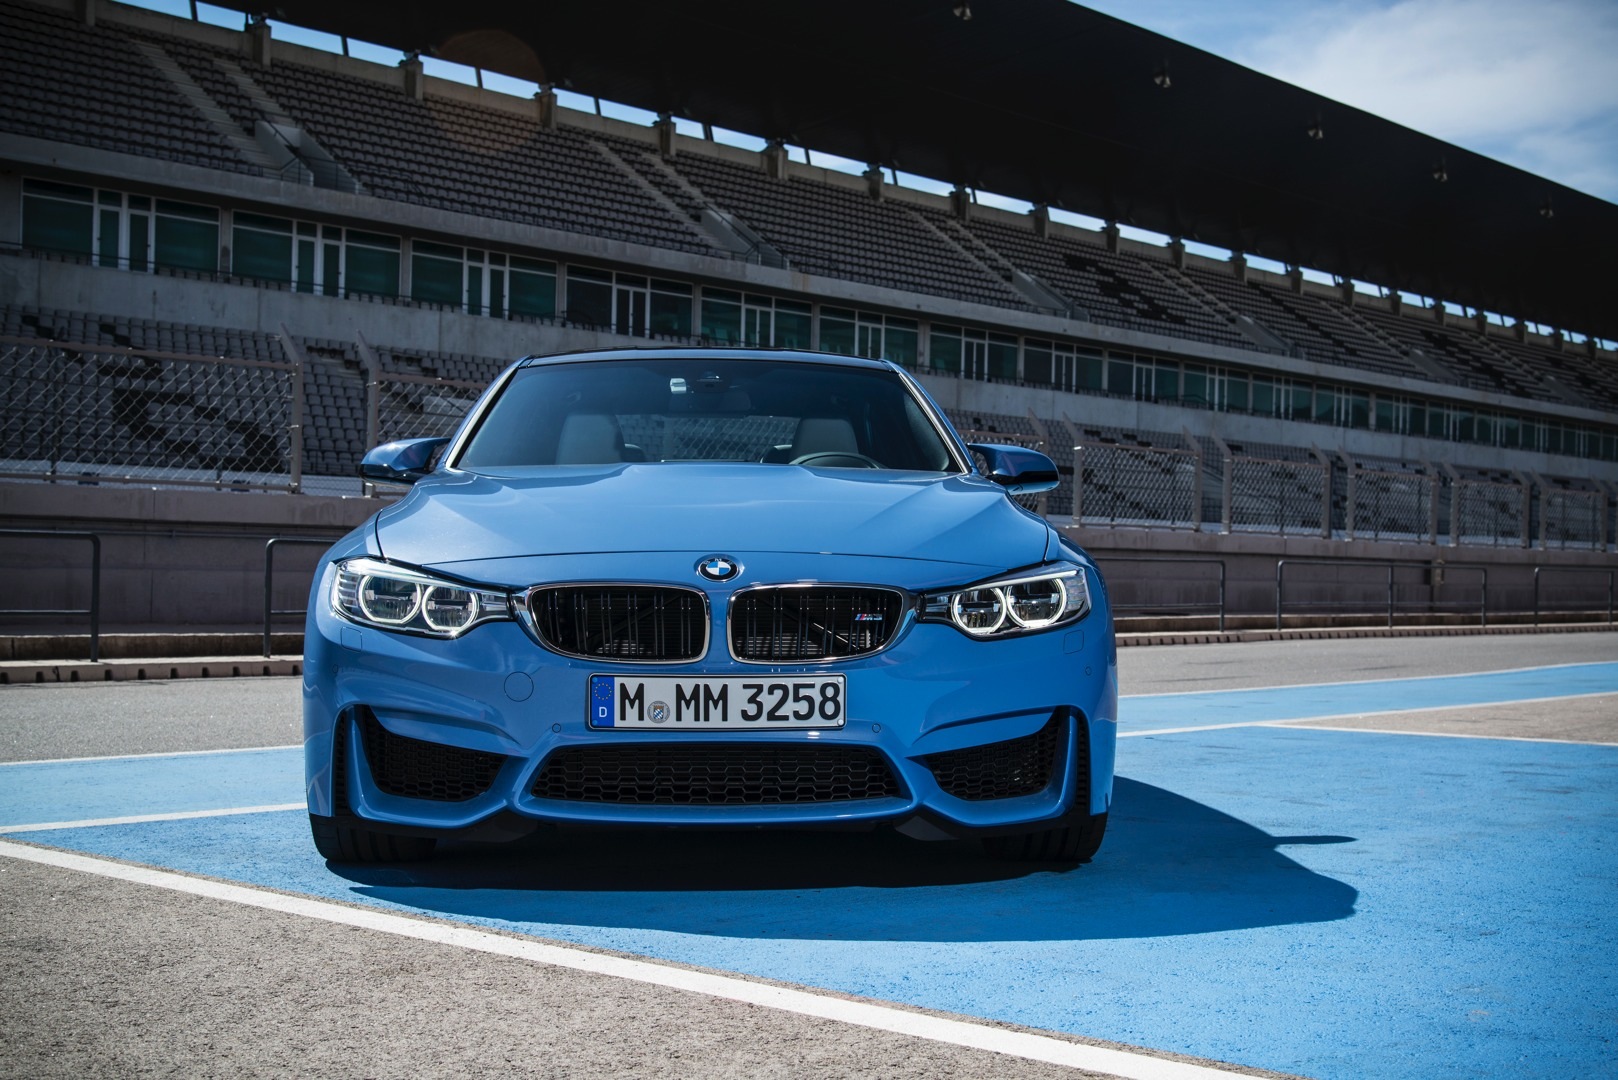 Free Download 2015 Bmw M3 And M4 Wallpapers Photo Gallery 1618x1080 For Your Desktop Mobile 